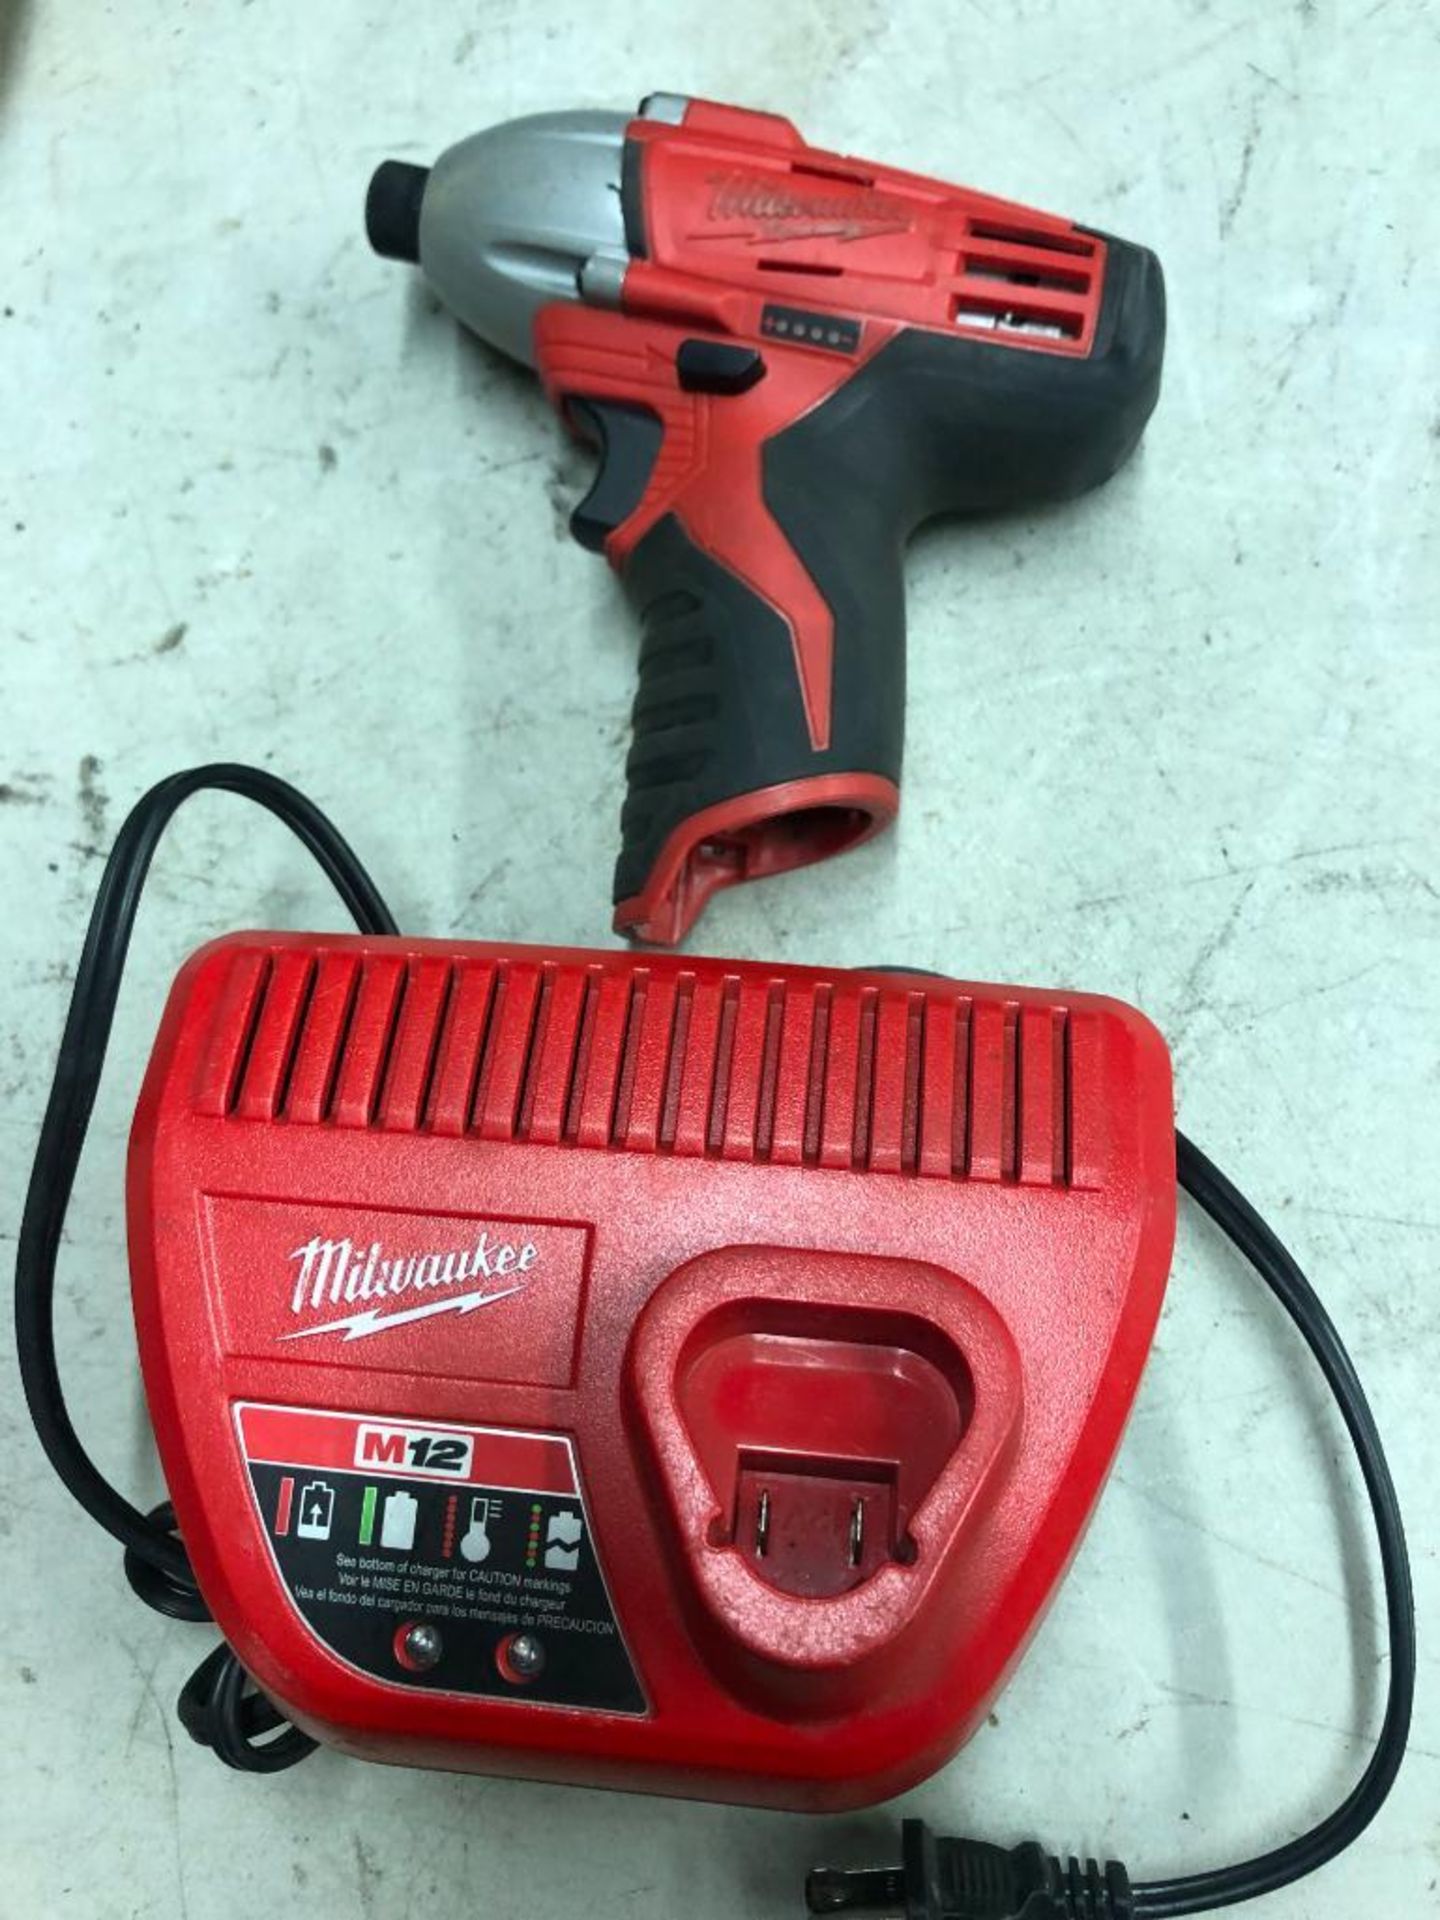 MILWAUKEE CORDLESS IMPACT DRIVER AND CHARGER